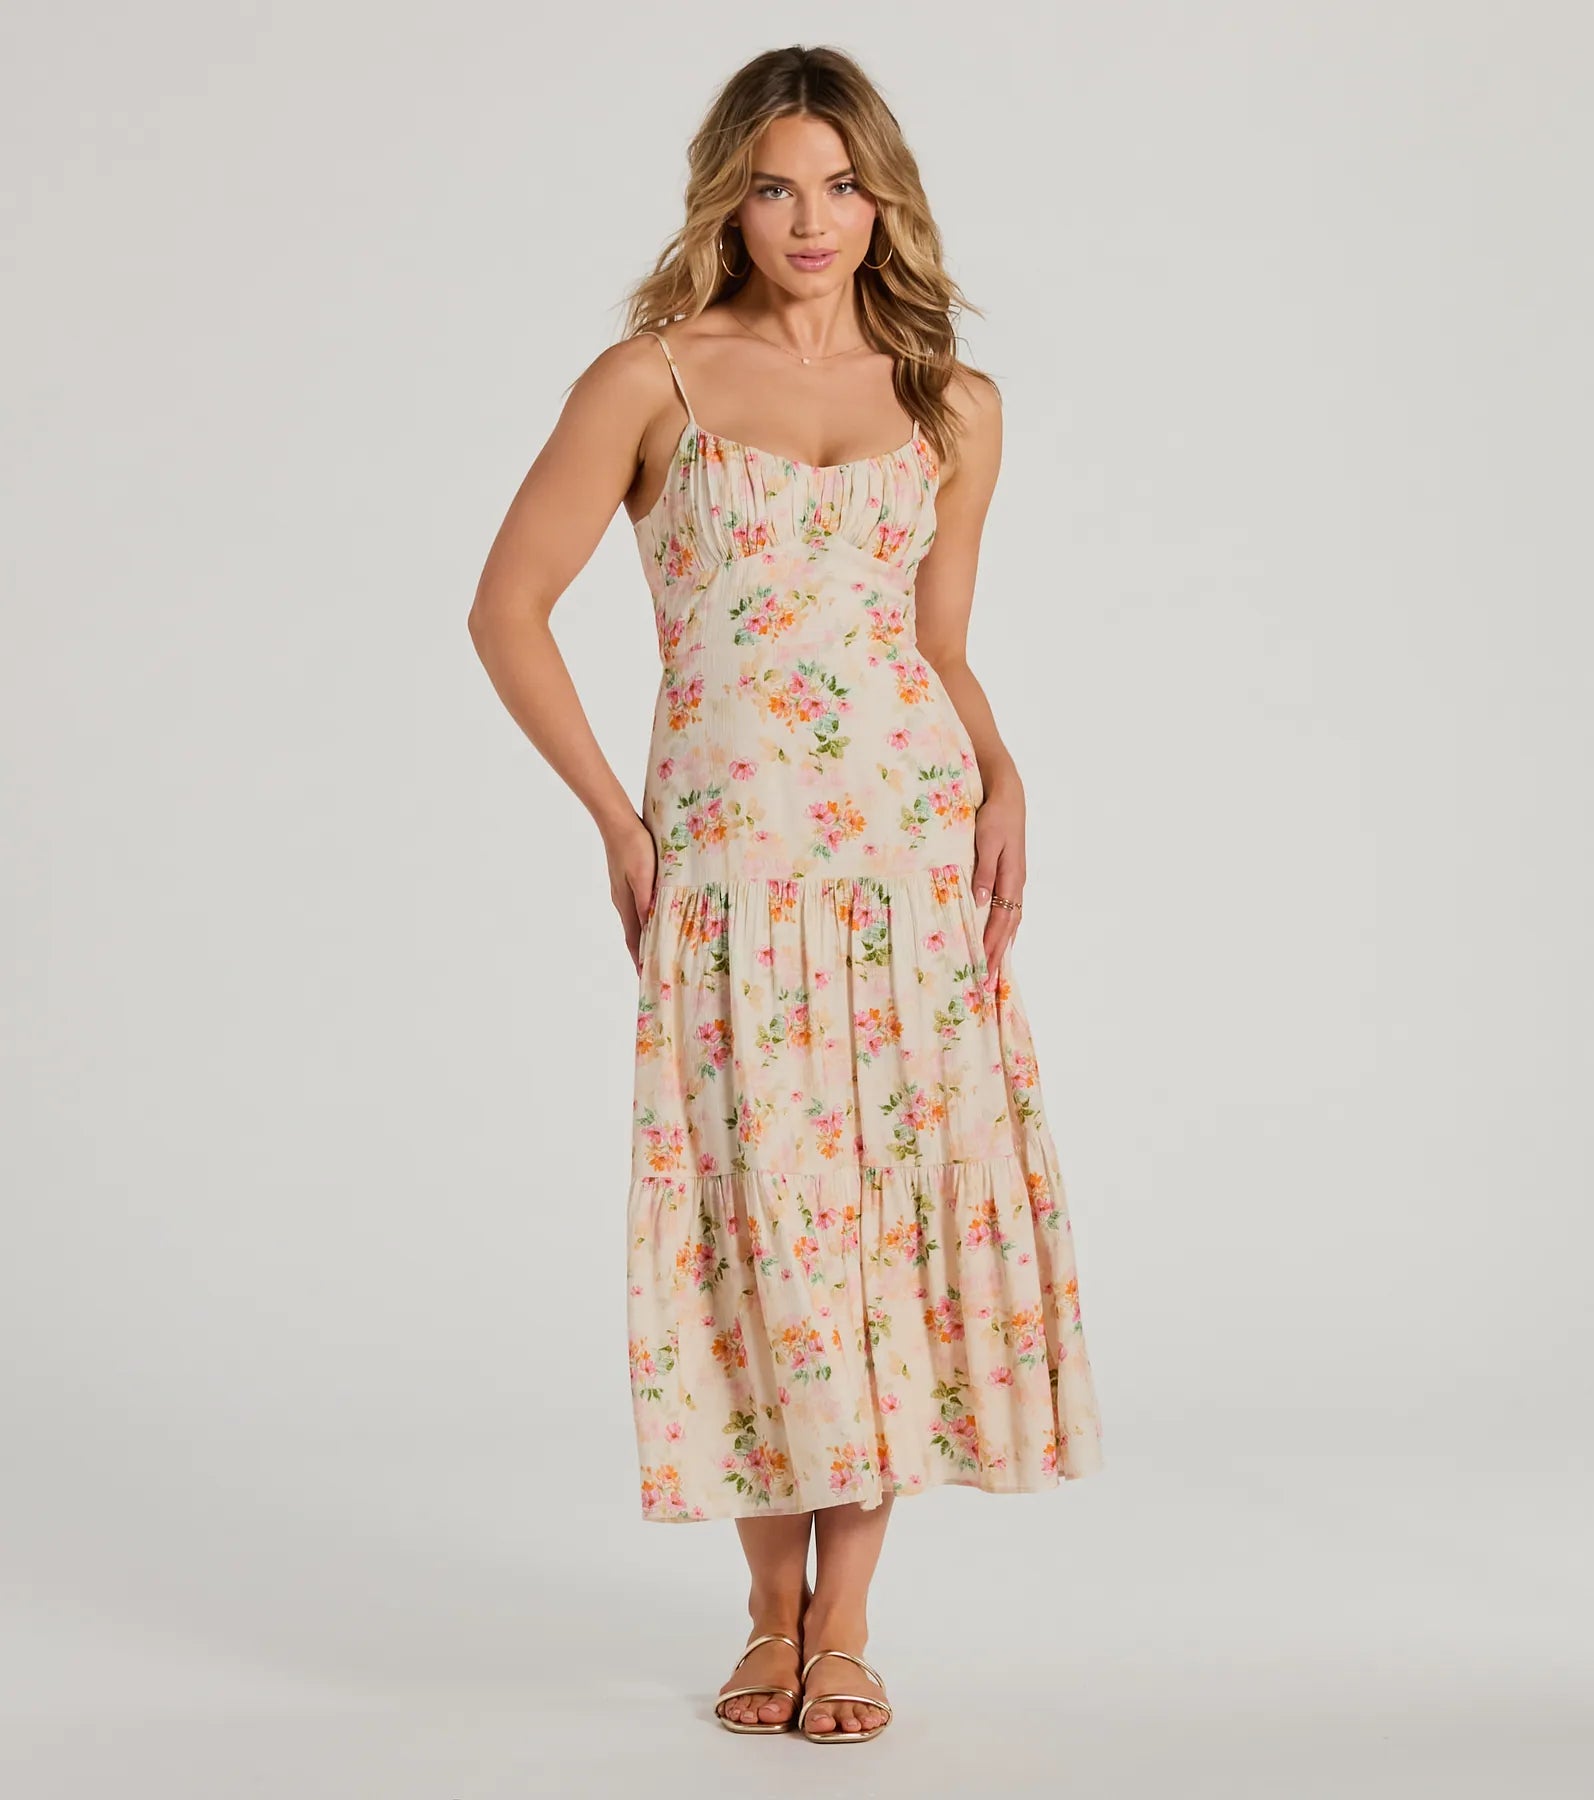 Floral Print Flowy Lace-Up Back Zipper Spaghetti Strap Cocktail Chiffon Scoop Neck Midi Dress With Ruffles